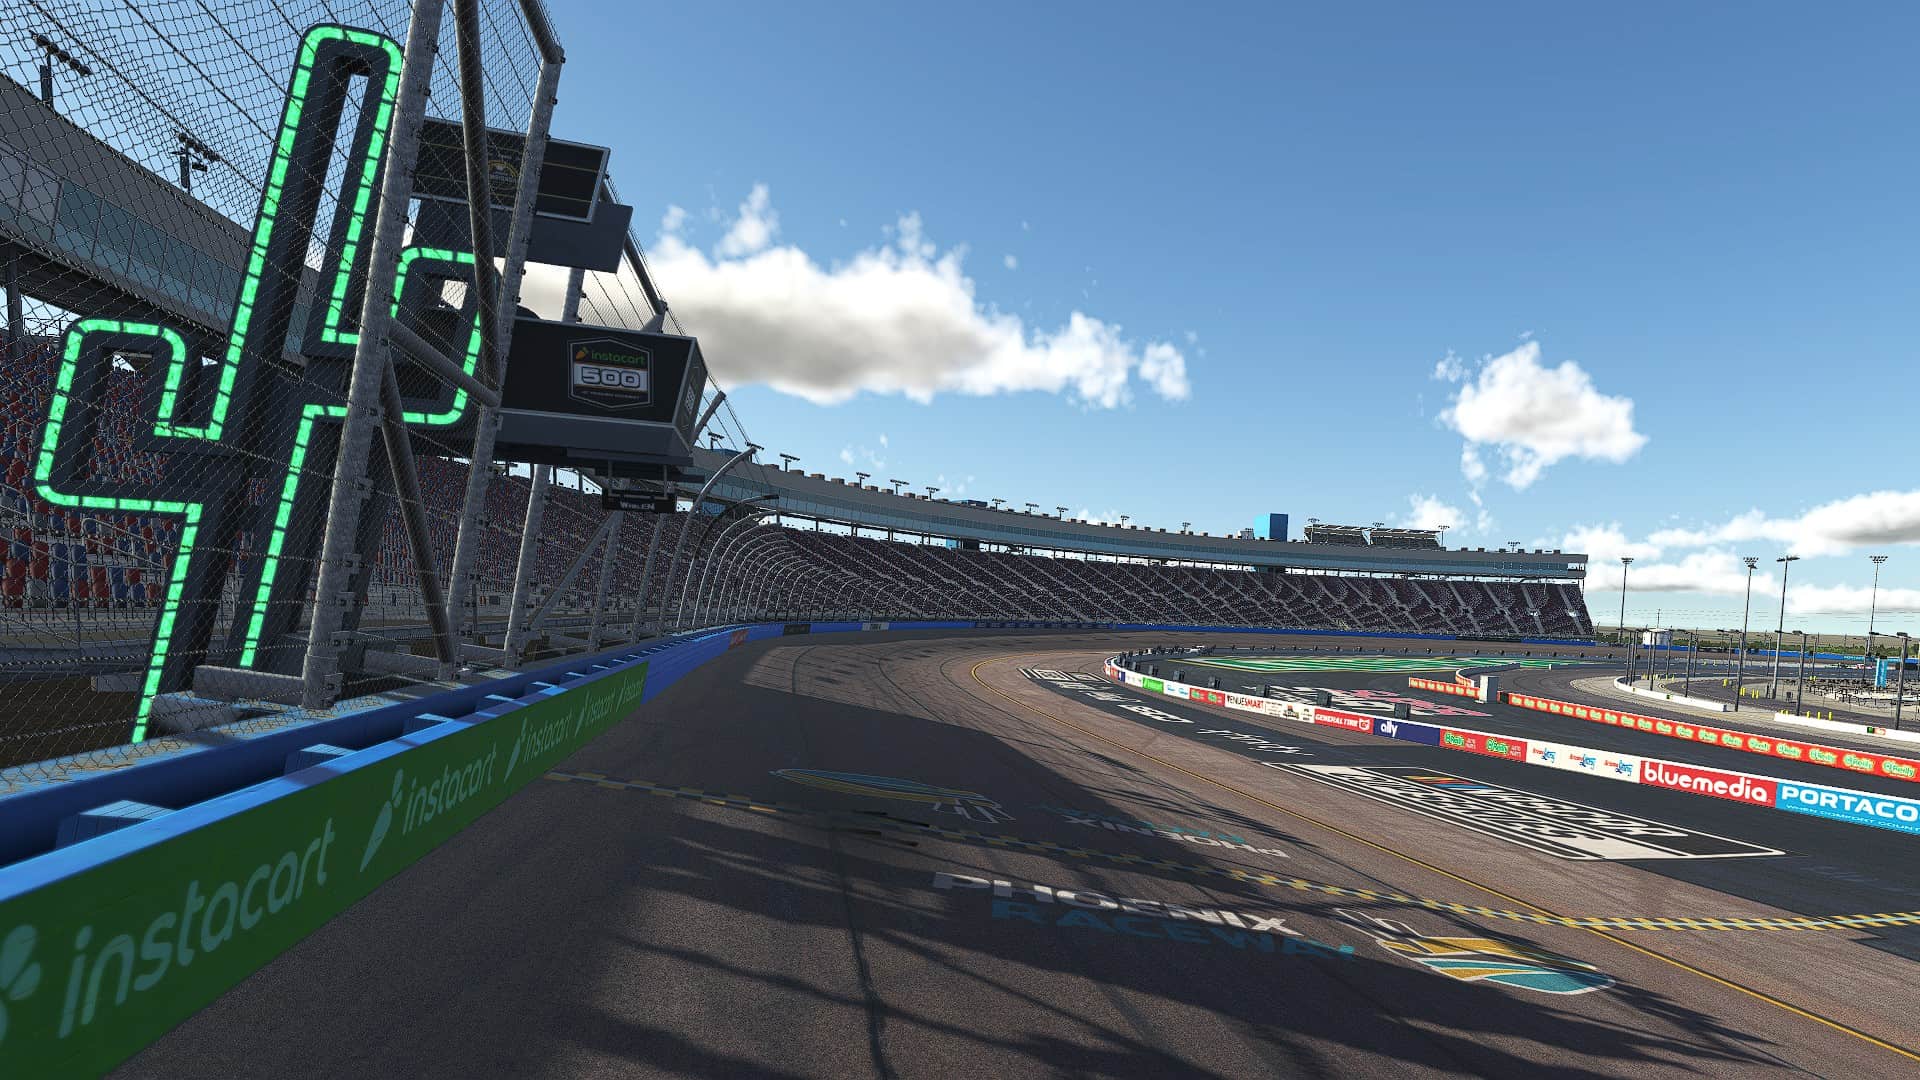 Hands on with 2021 Phoenix Raceway, 2021 iRacing Season 4 Patch 3 notes